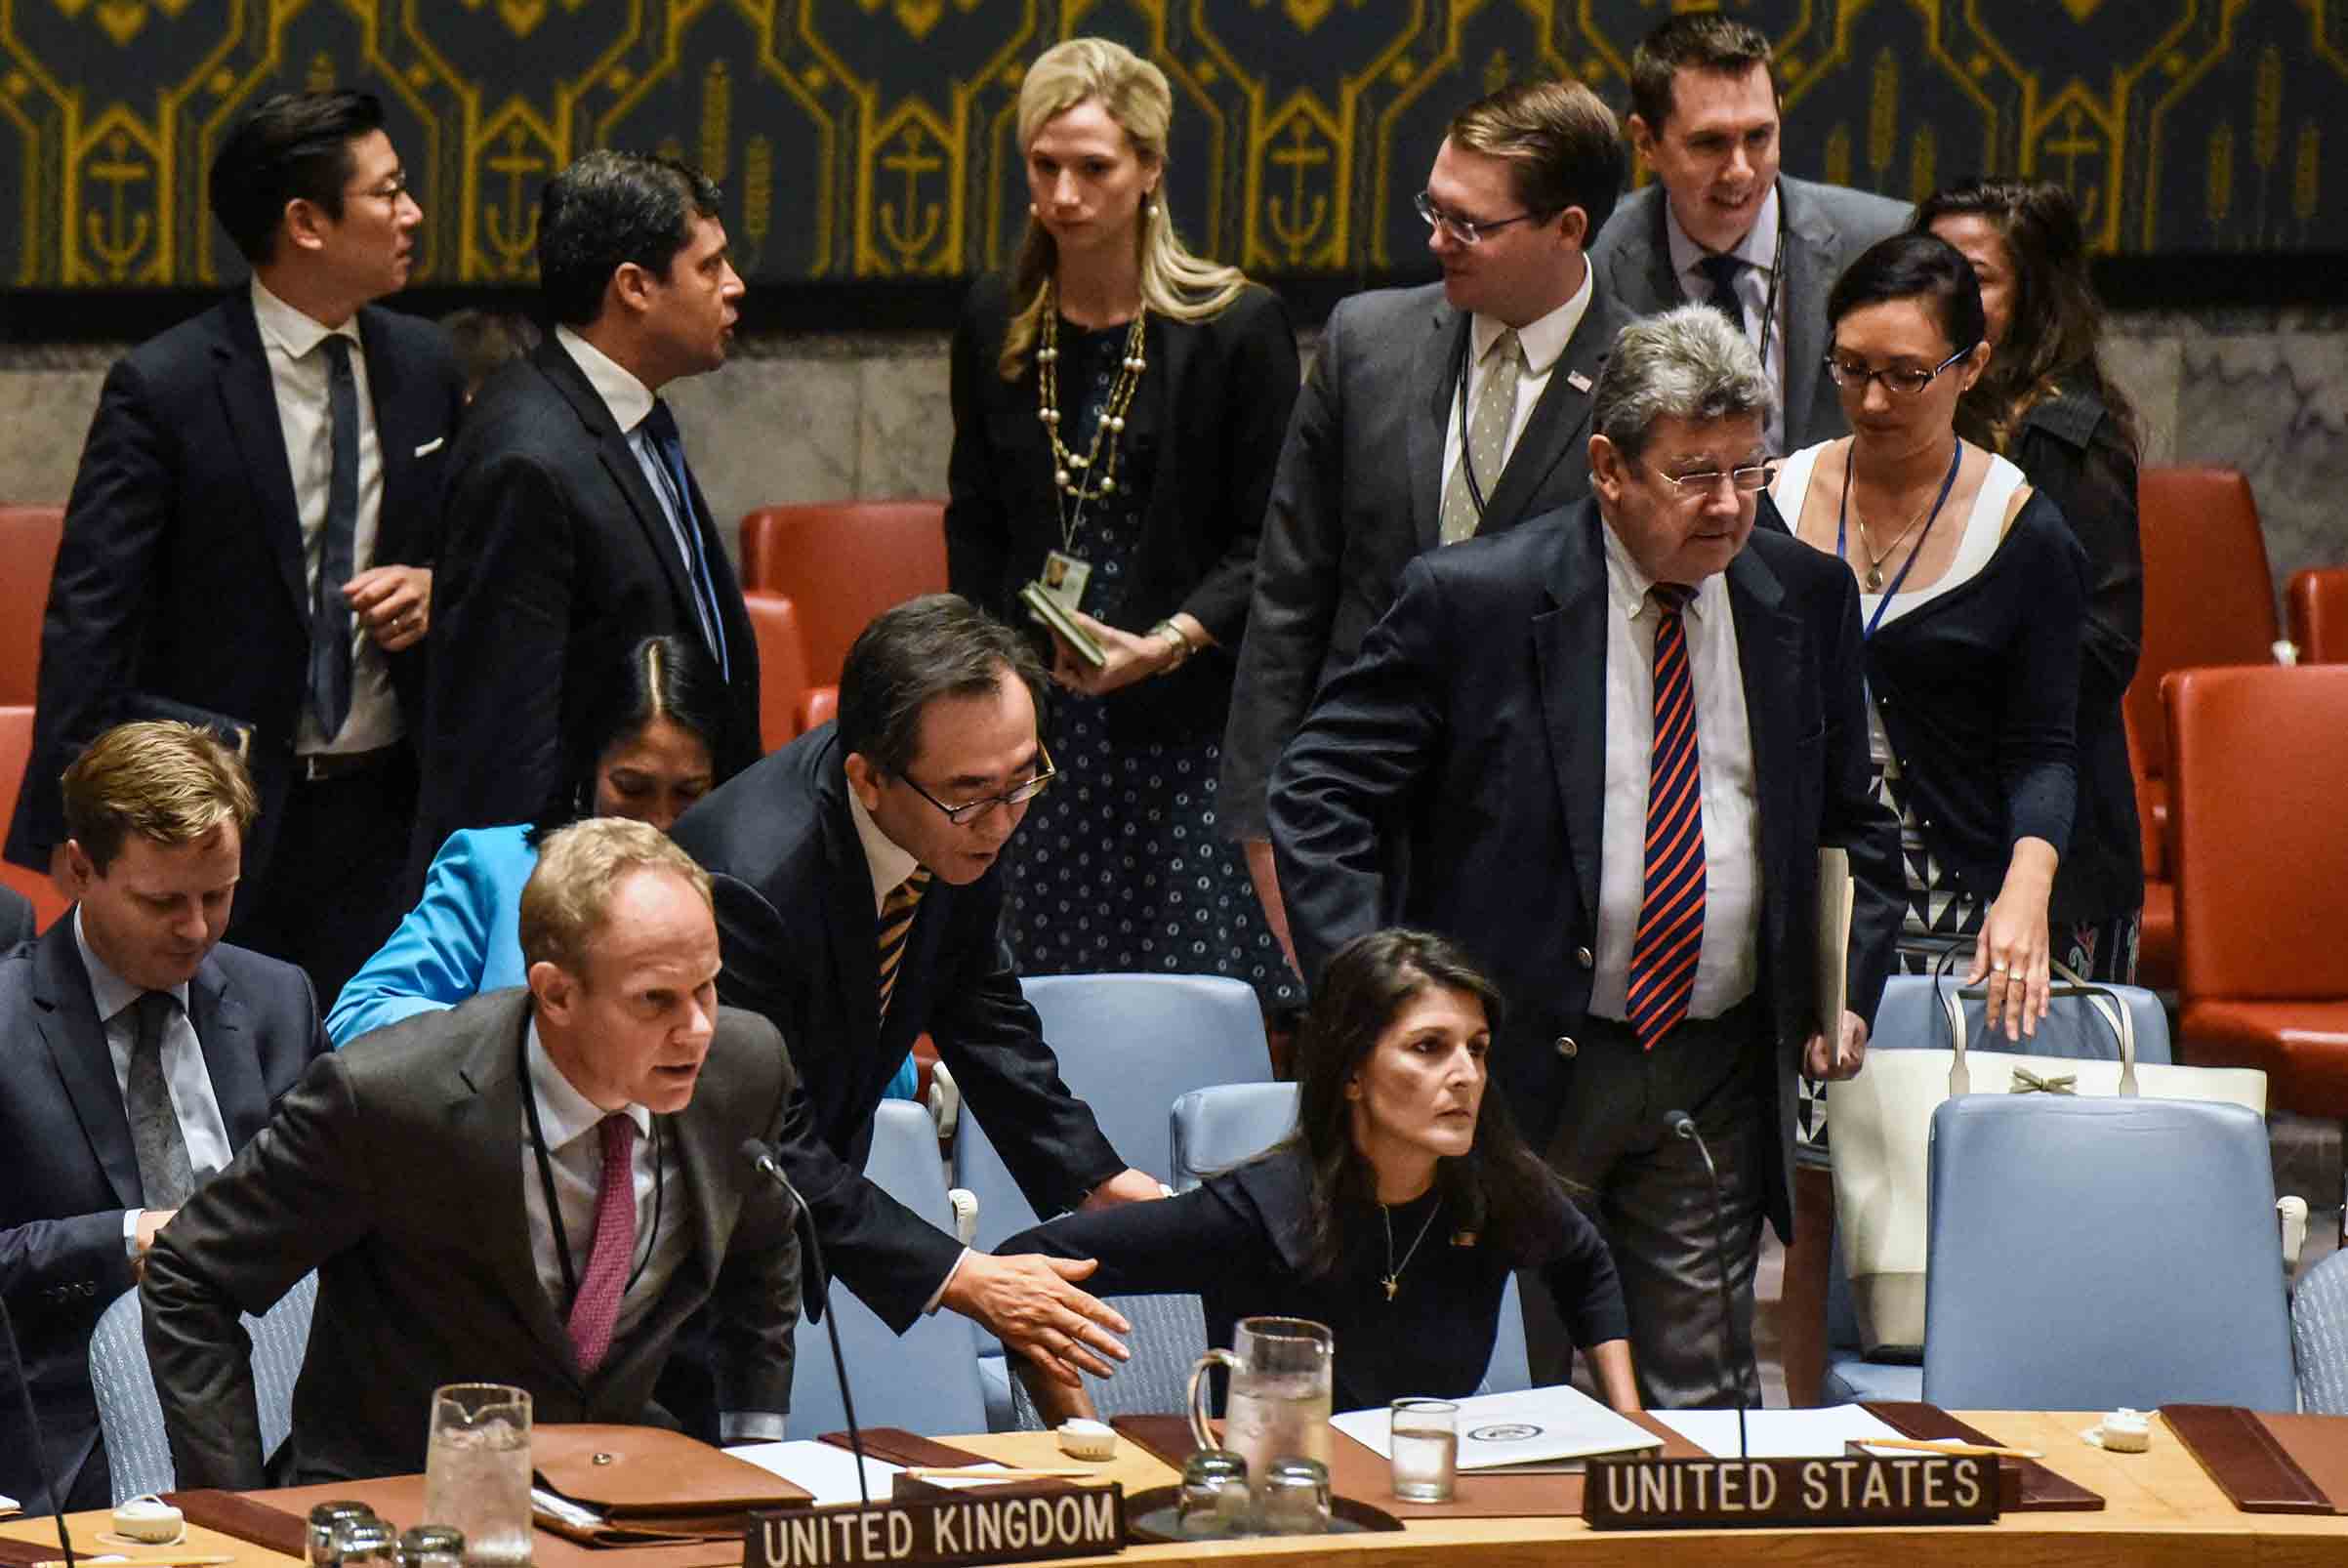 South Korean Ambassador Cho Tae-Yul tries to get the attention of Ambassador to the UN, Nikki Haley during a United Nations Security Council meeting on North Korea on Sept. 4 in New York City. (Stephanie Keith—Getty Images)